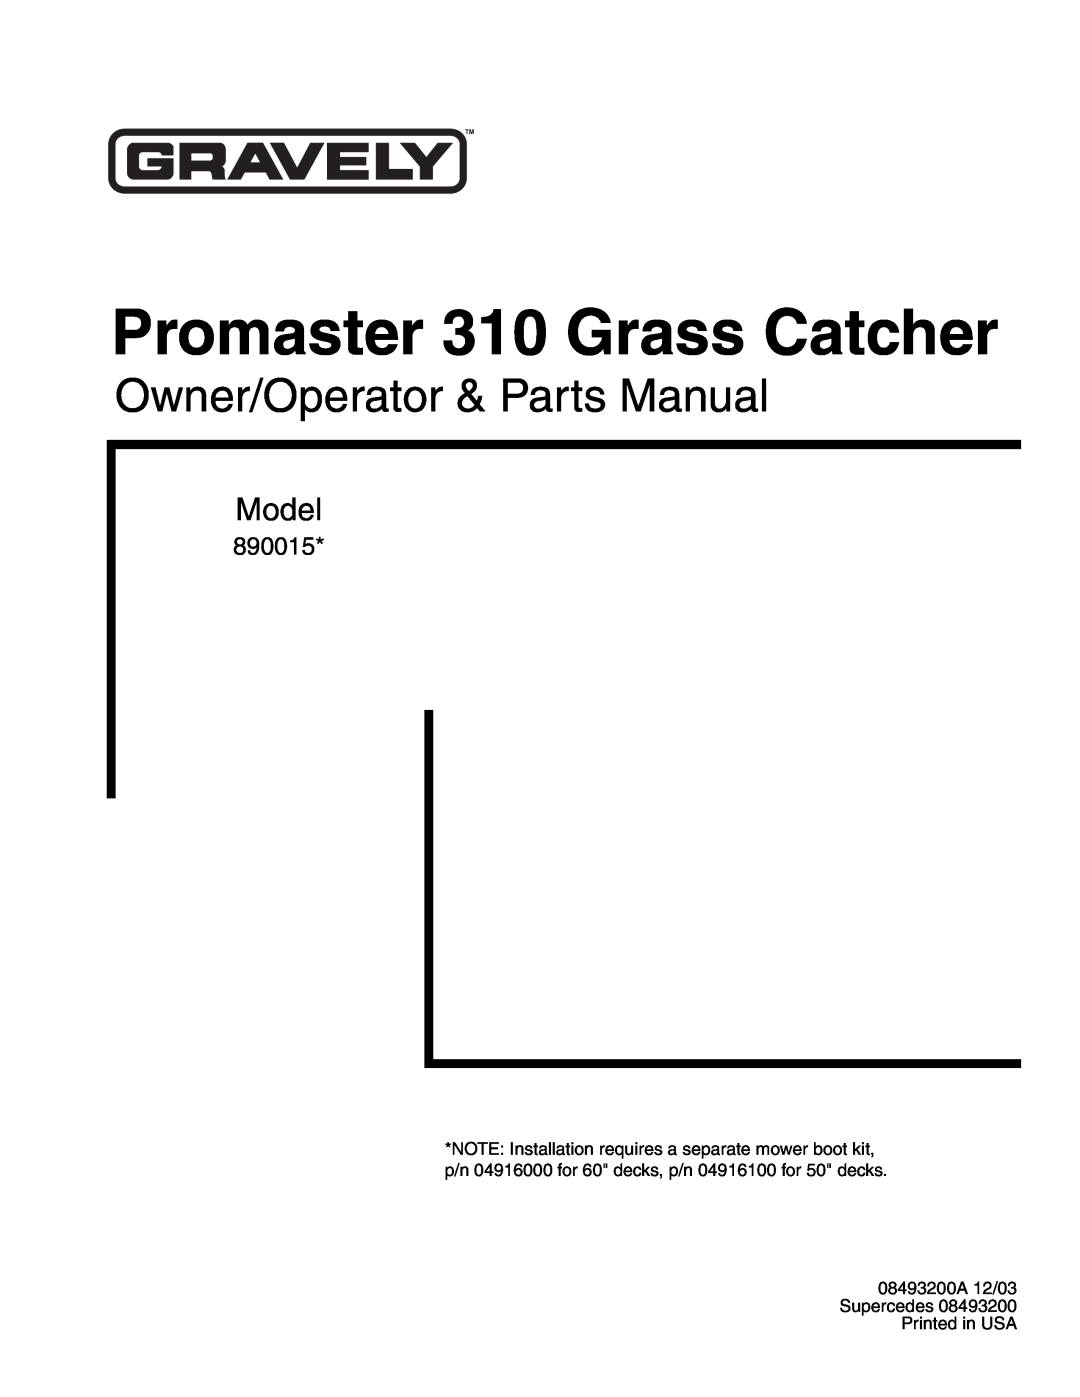 Gravely 890015* manual Promaster 310 Grass Catcher, Owner/Operator & Parts Manual, Model 